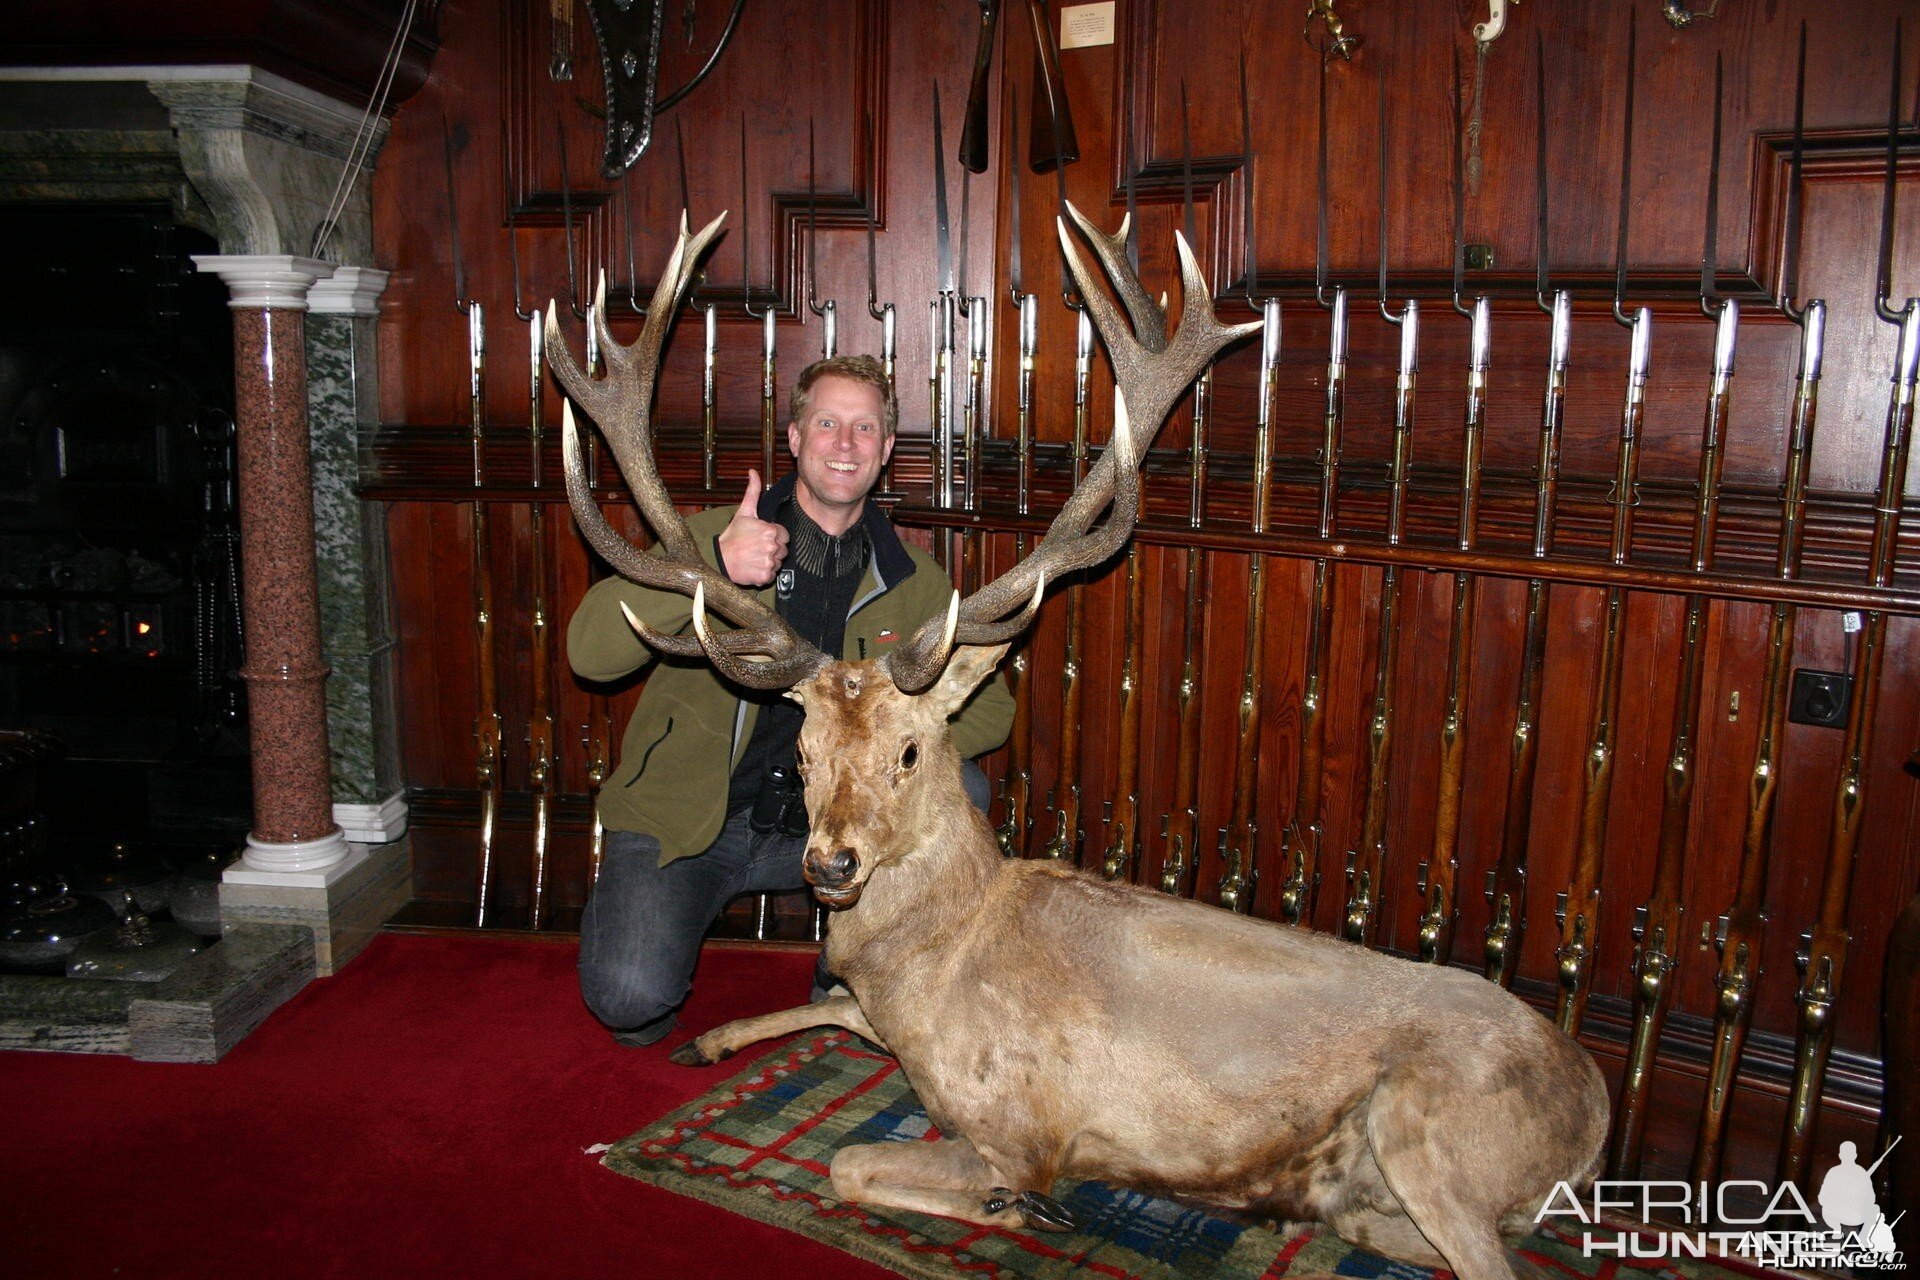 Red Stag Scotland